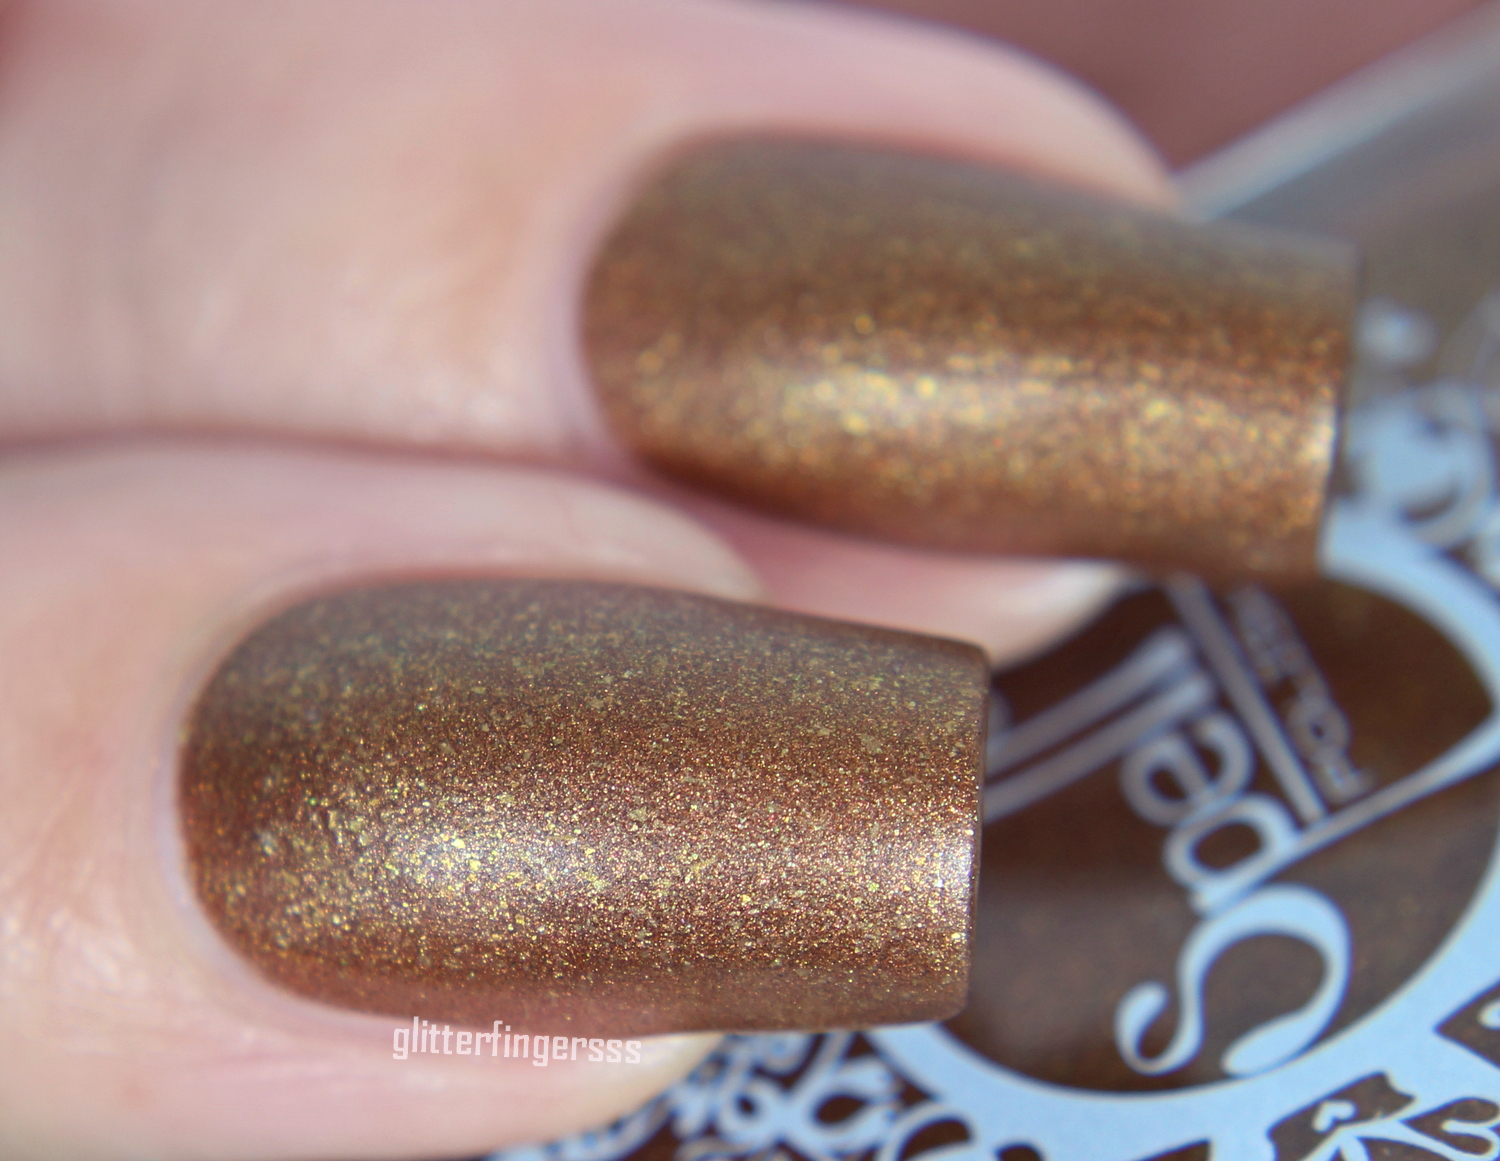 Spell Polish swatch/review ~ Glitterfingersss in english1500 x 1161